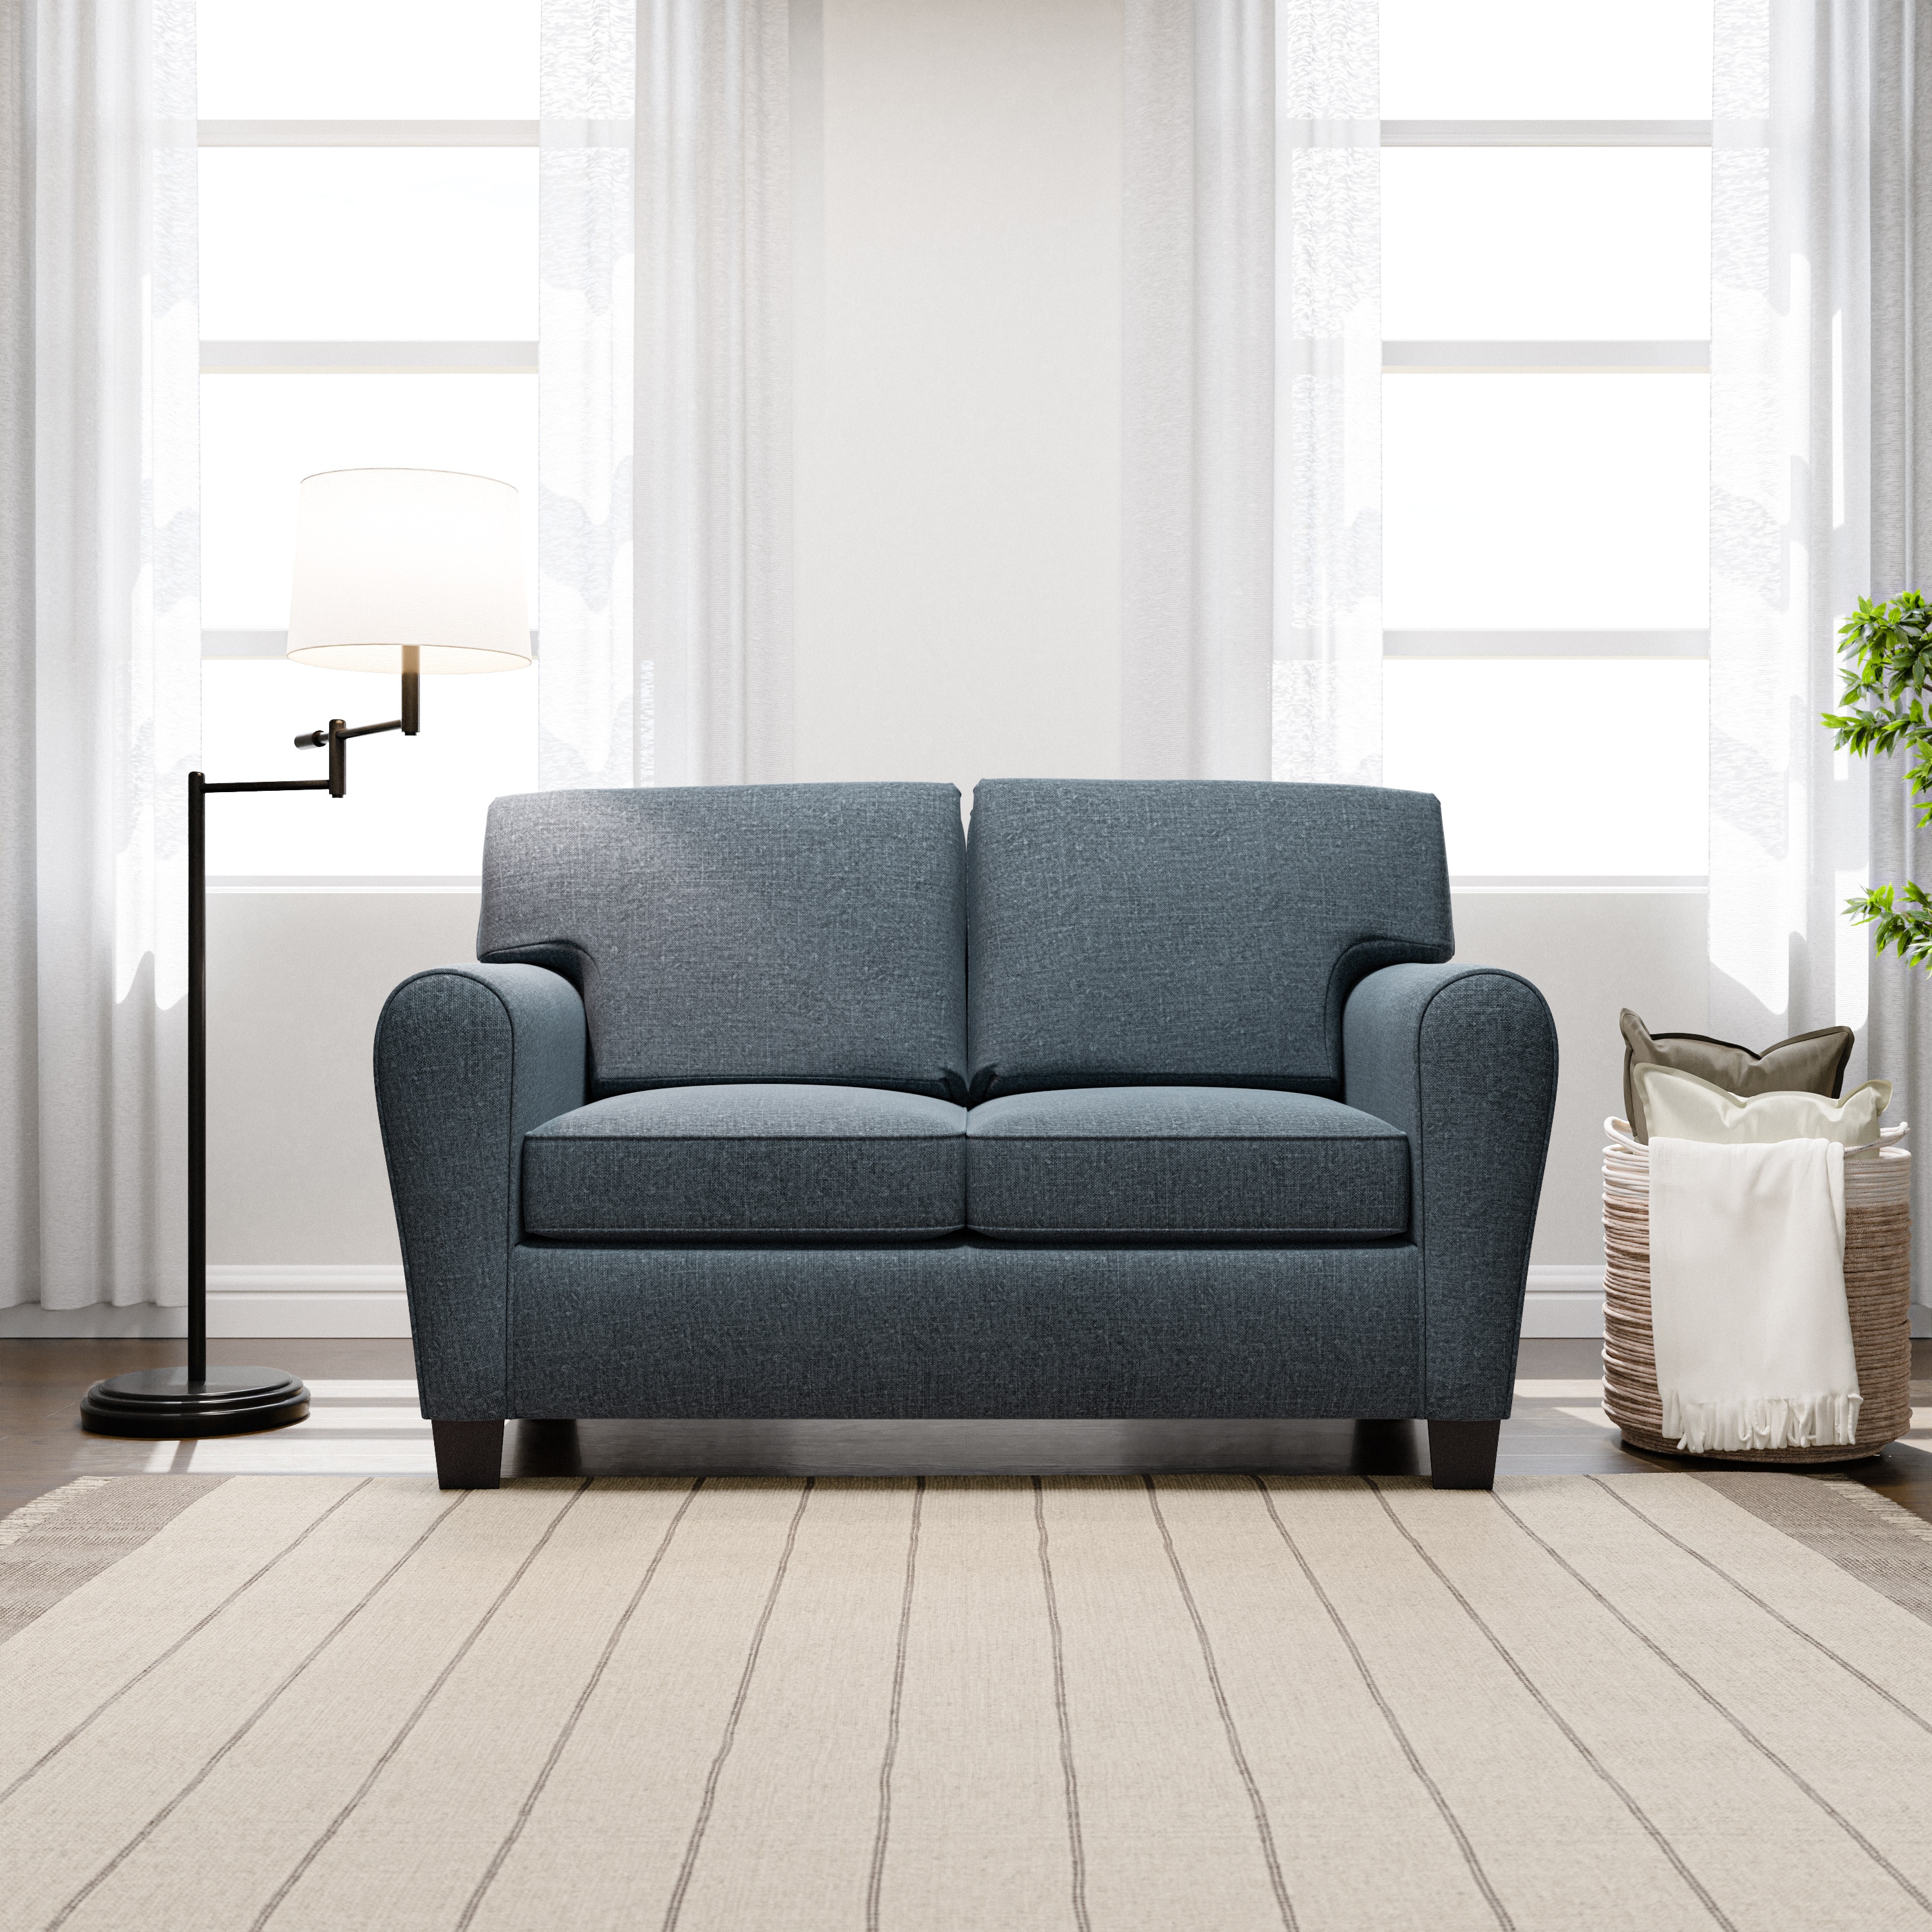 Brookside Abby Casual Navy Polyester/Blend Loveseat in Blue | BS0004LVS00NV